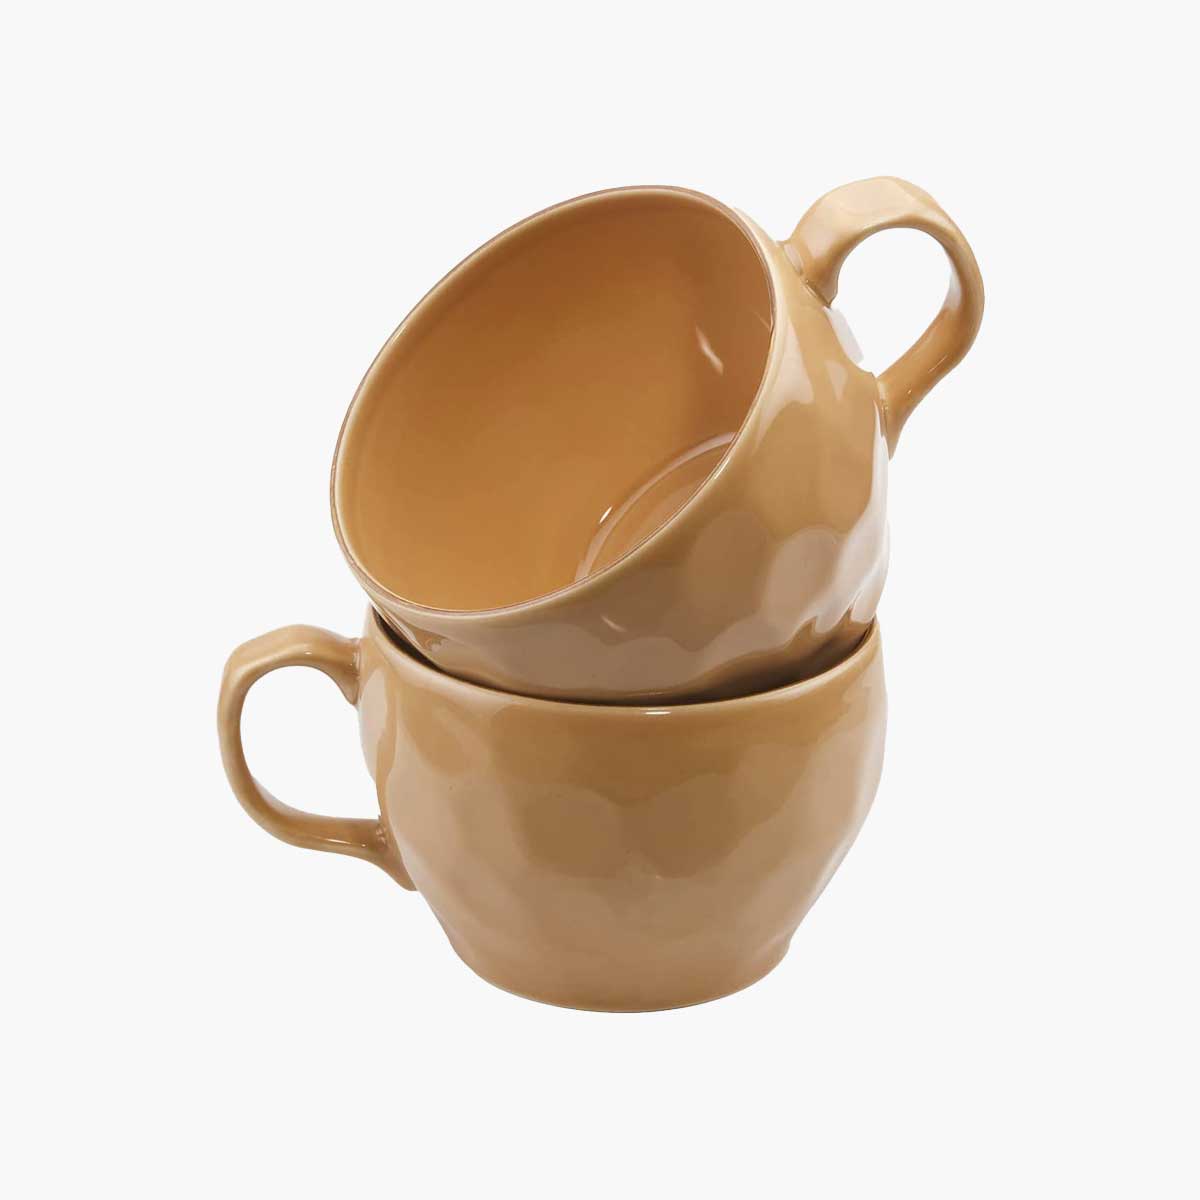 Two ceramic coffee cups, one of Oprah's 12 favorite kitchen gifts for 2021.